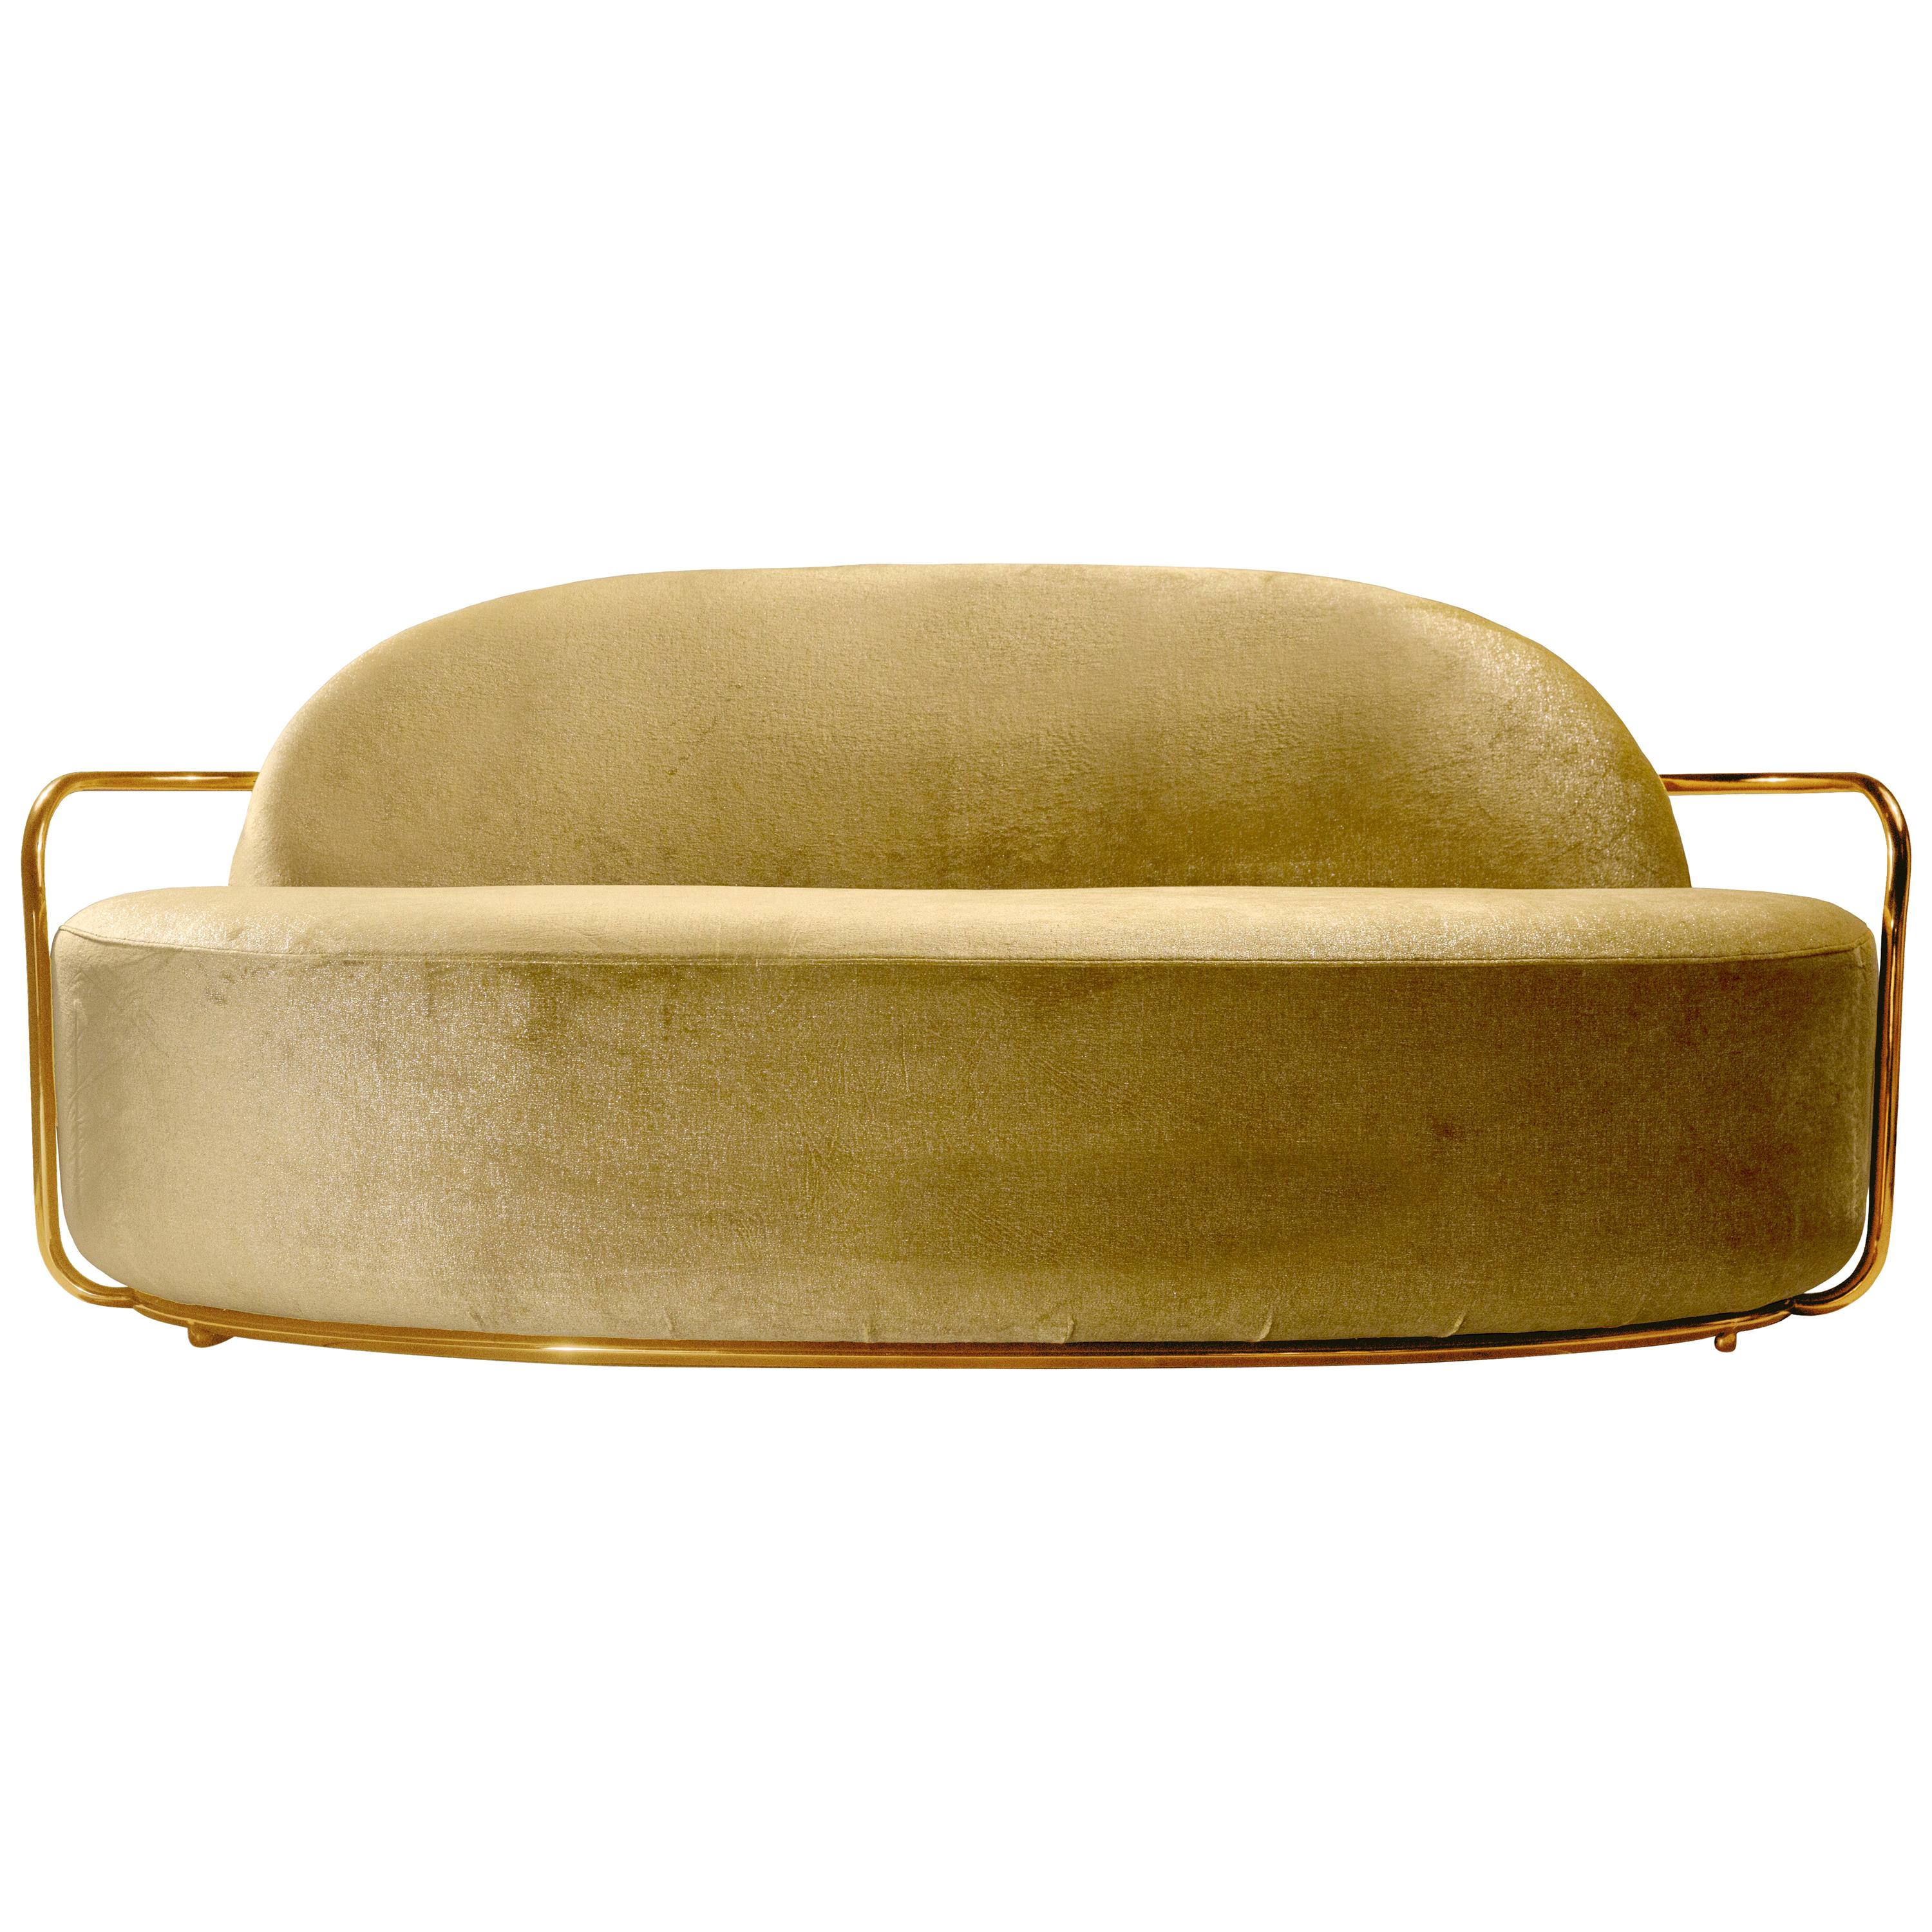 Orion 3 Seat Sofa with Dedar Velvet and Gold Arms by Nika Zupanc